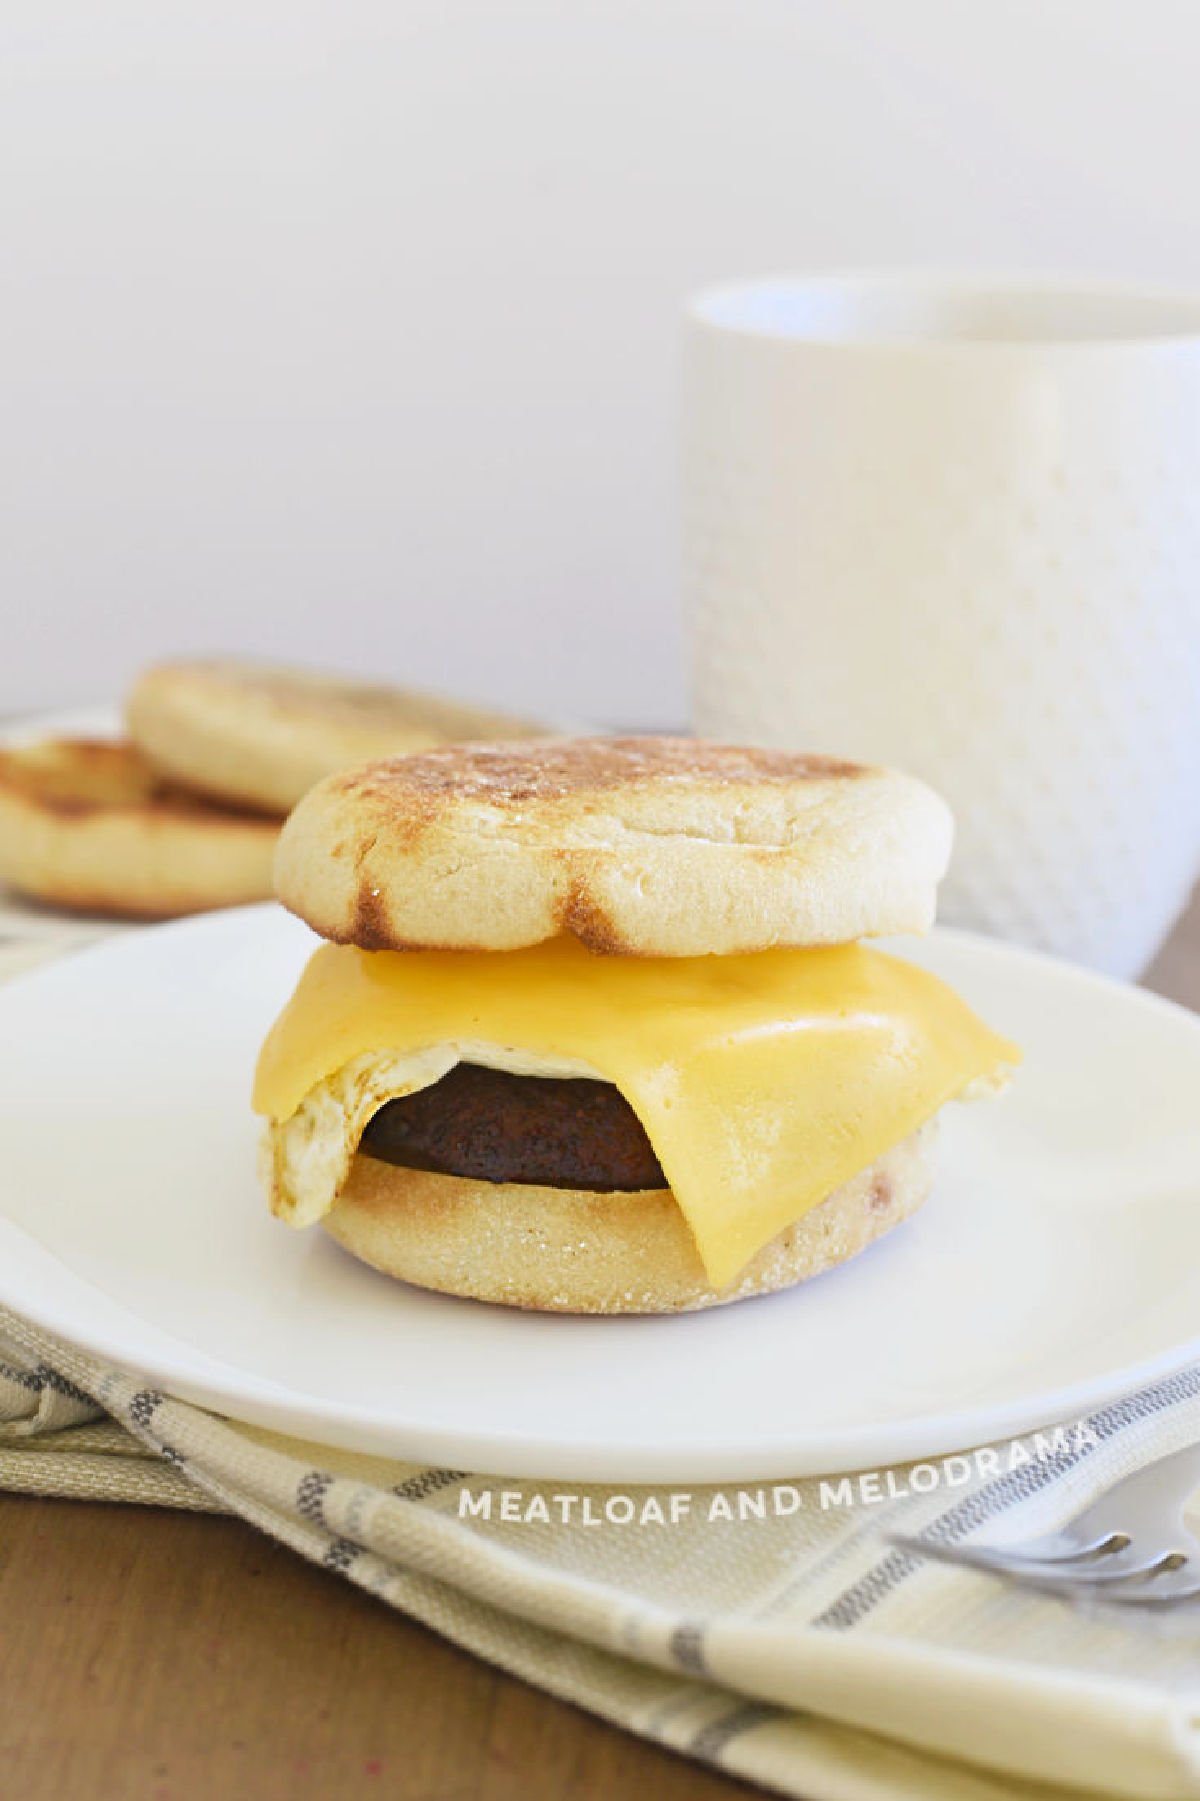 egg breakfast sandwich recipe with sausage and cheese on english muffin